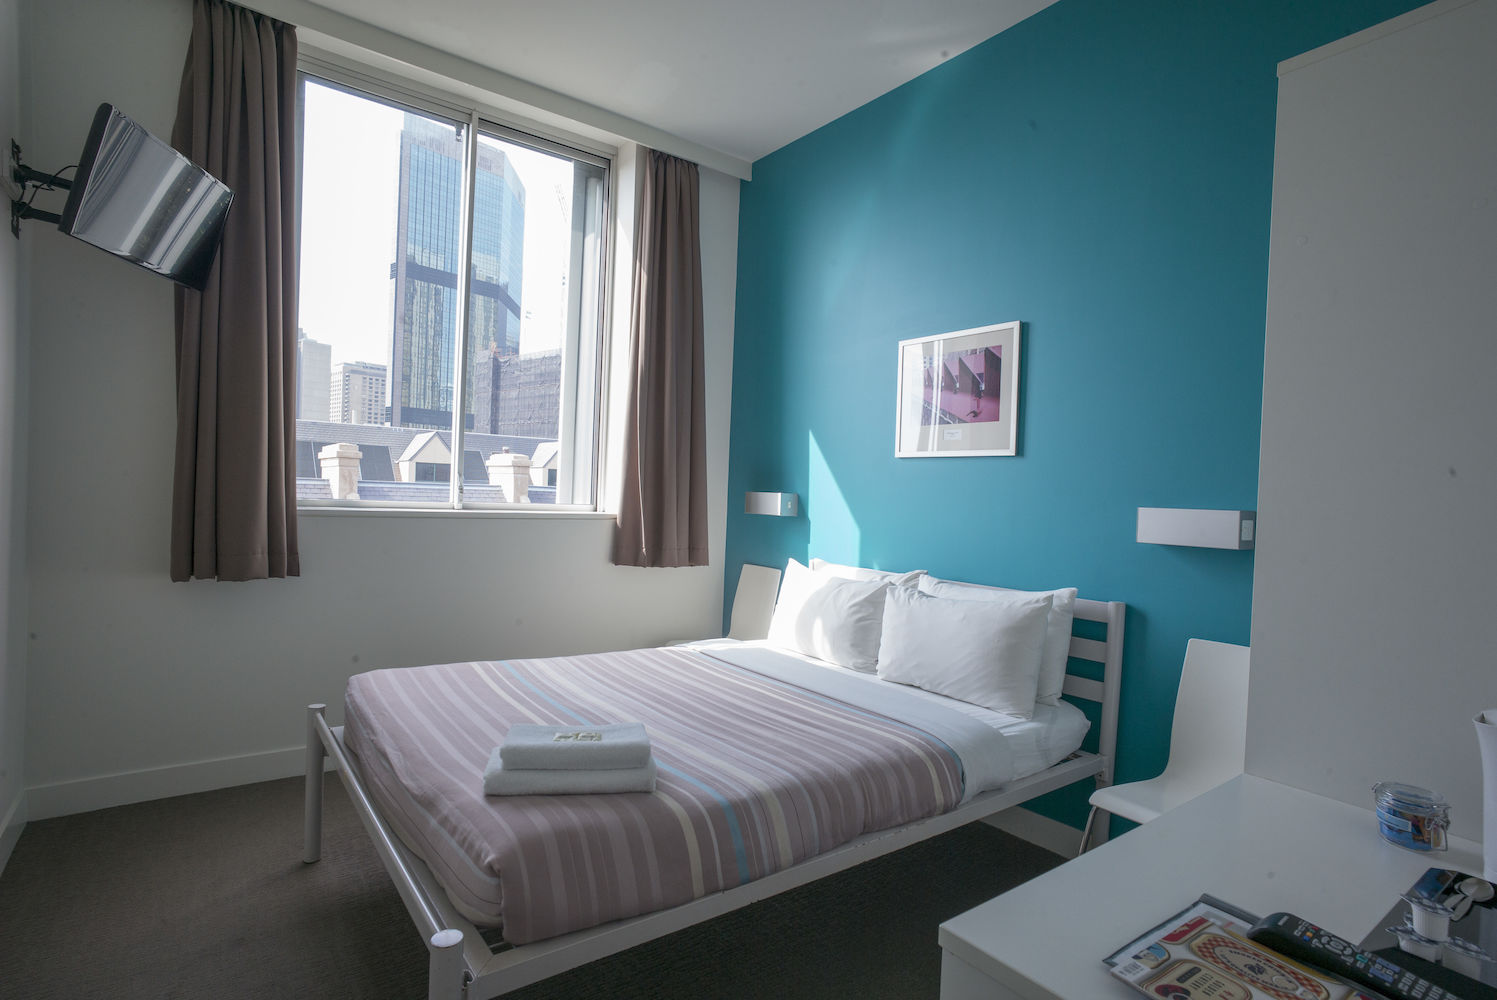 Sydney Harbour Yha Hostel In Sydney Prices How To Compare